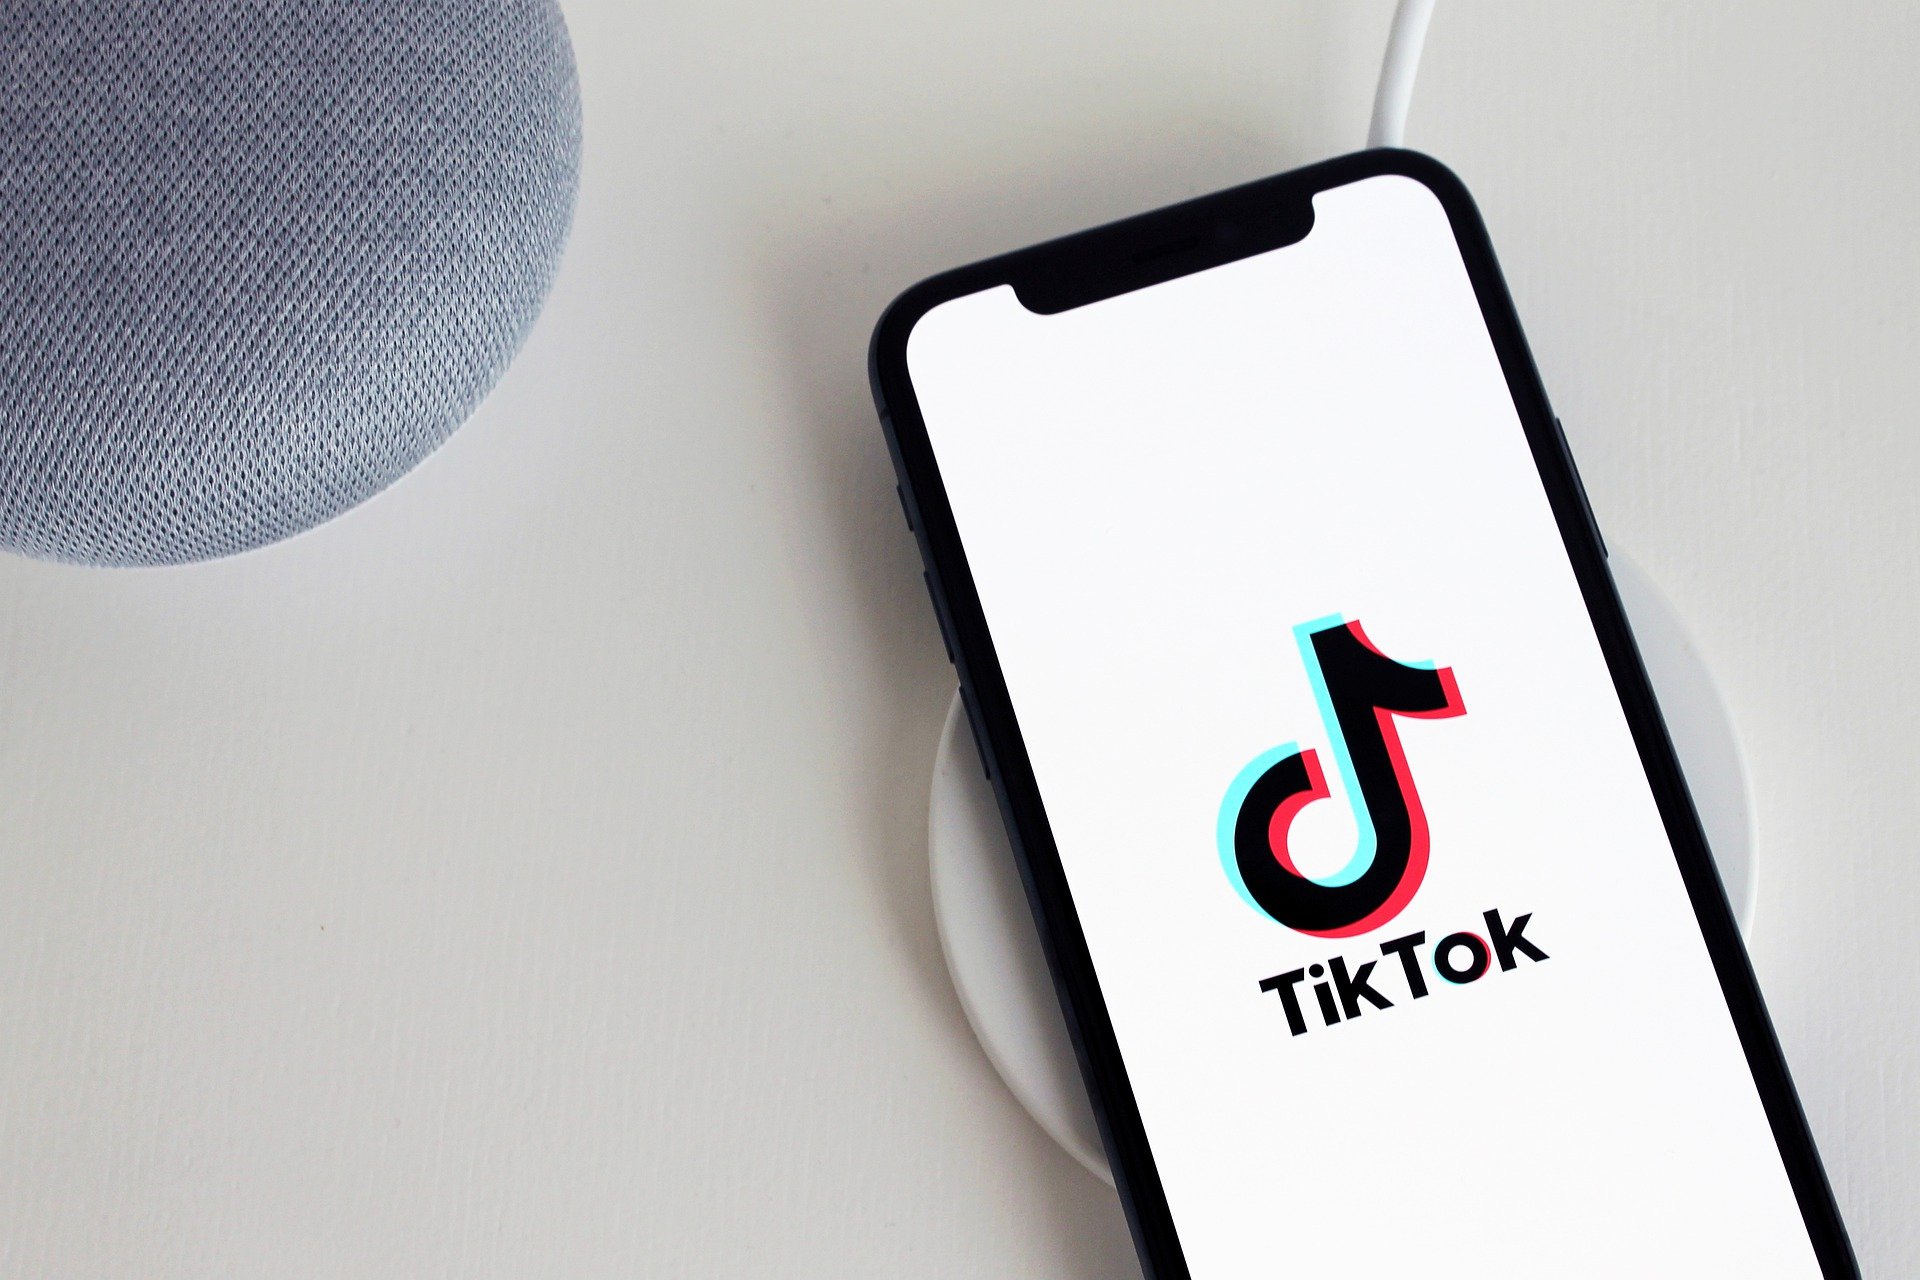 TikTok Short Videos Now on Google Search Results Page